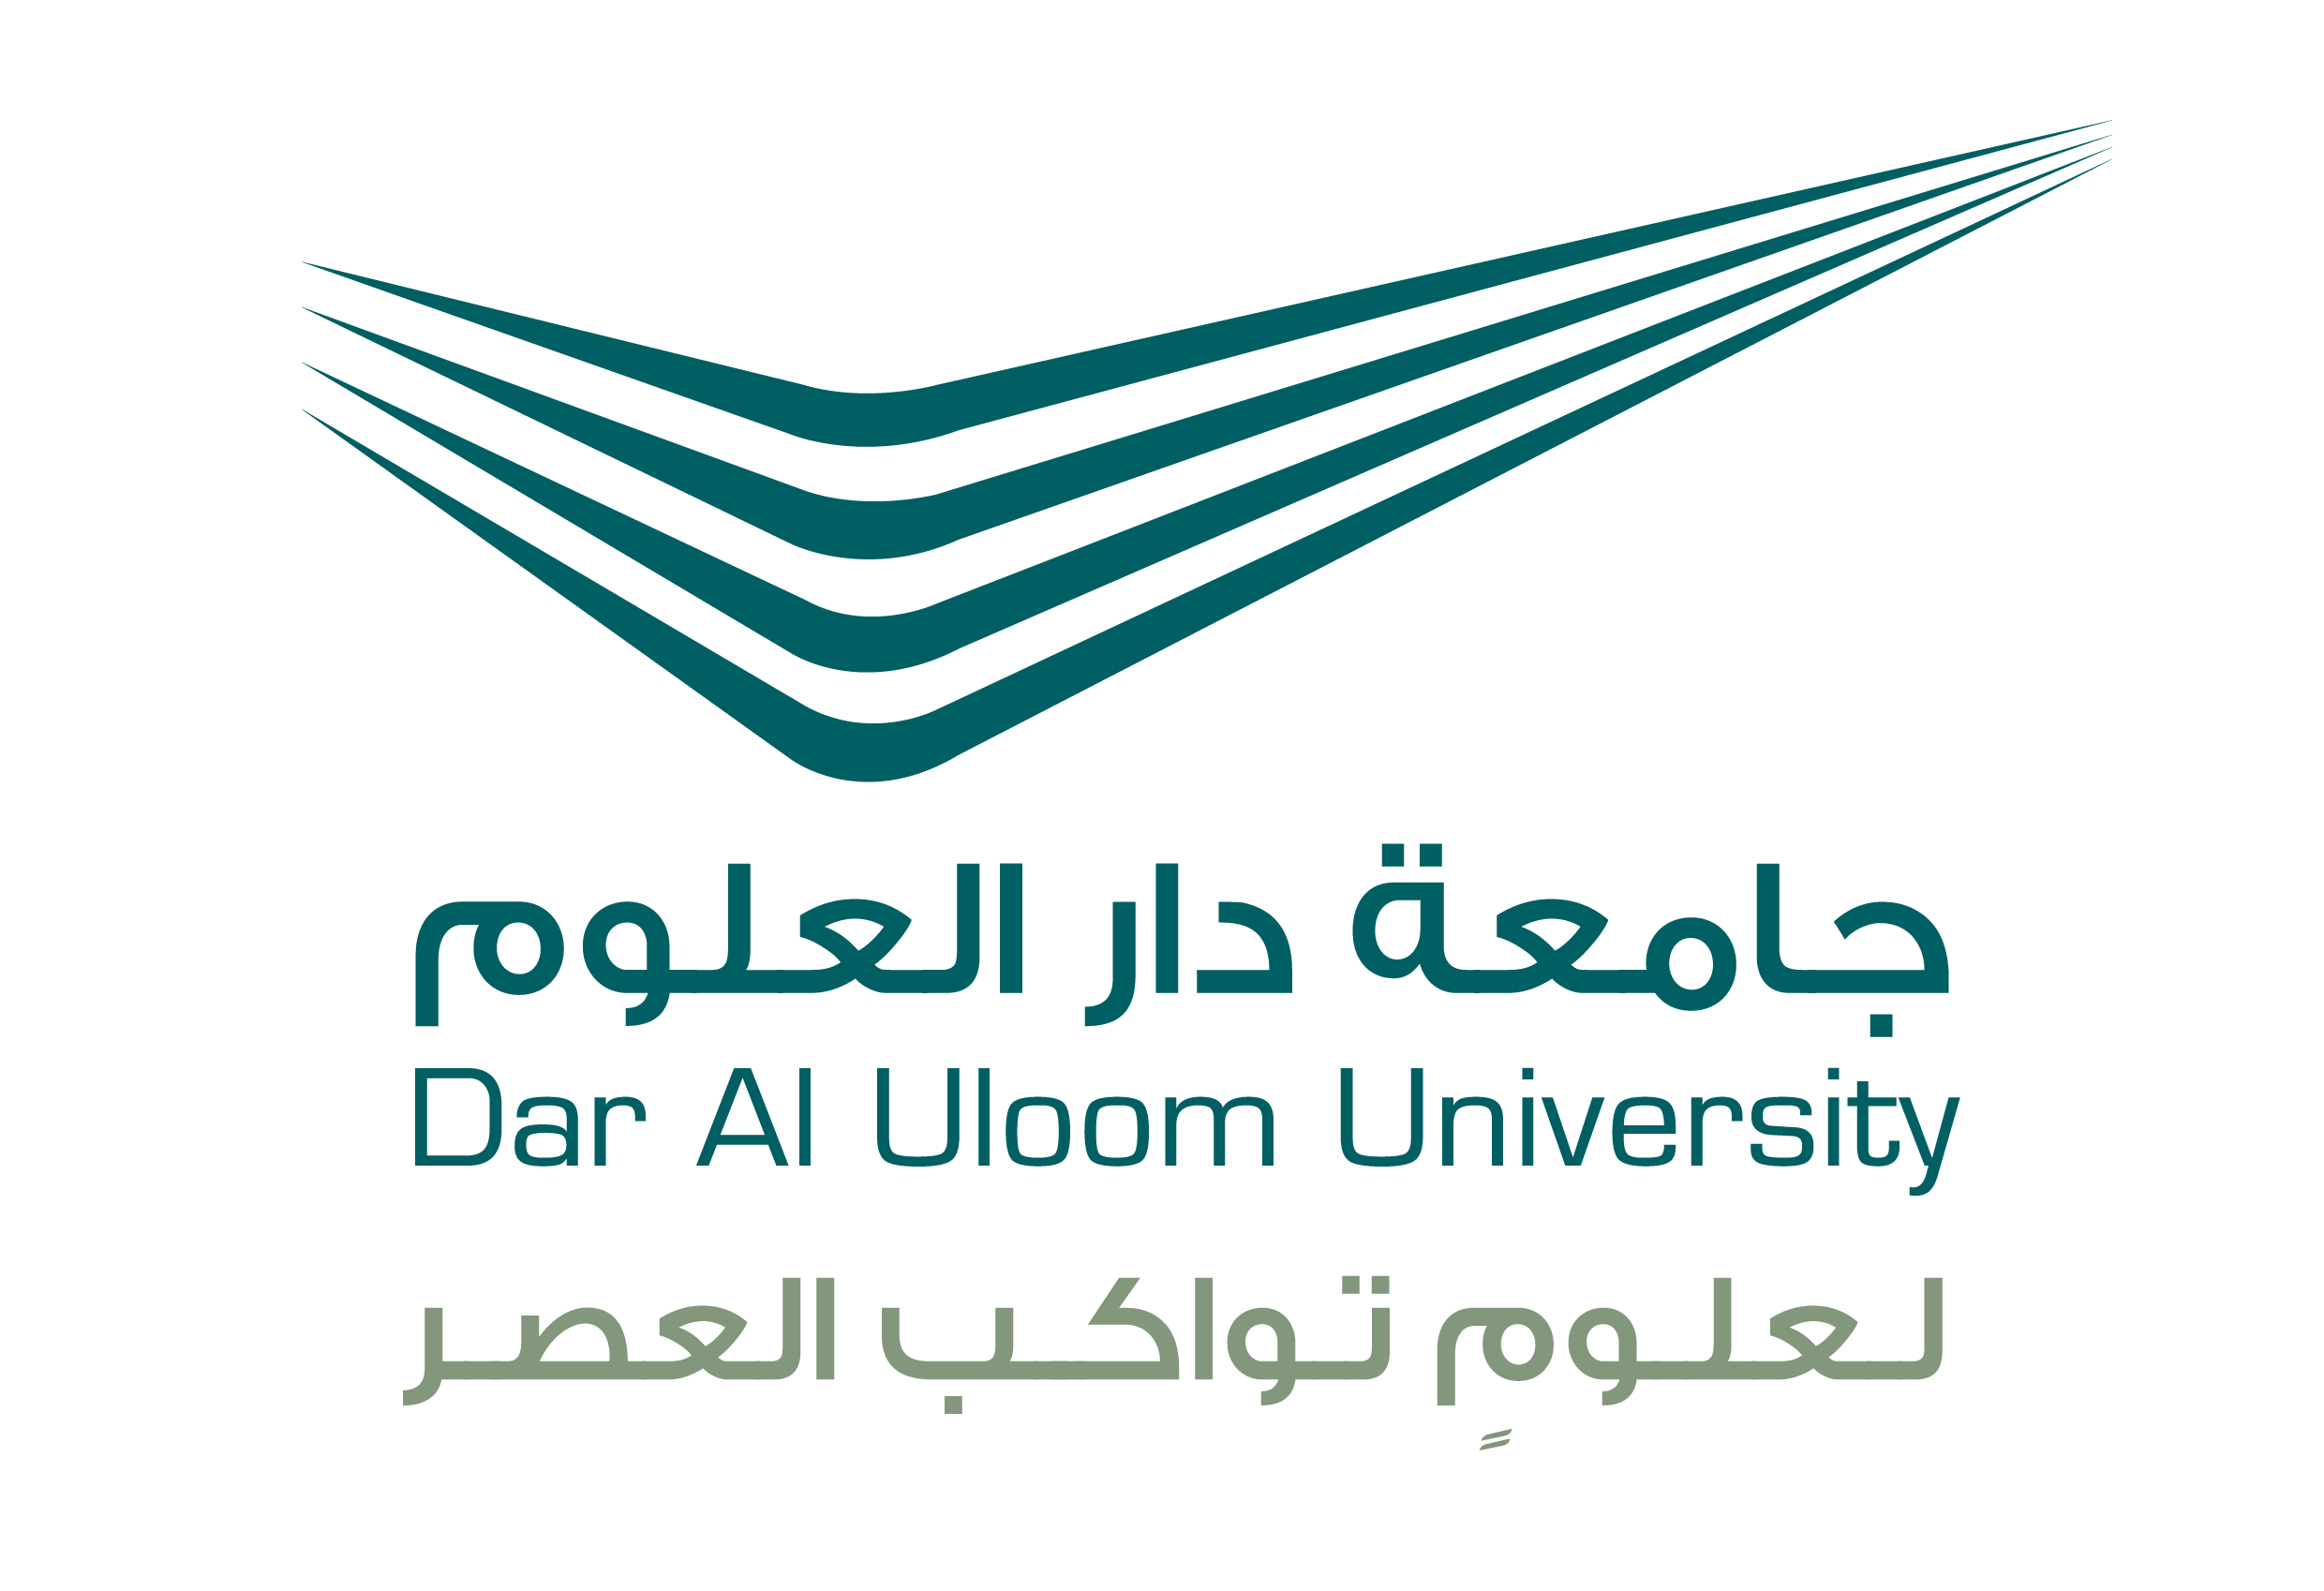 Ministry of Education Approved an Arabic track for COB’S undergraduate programs